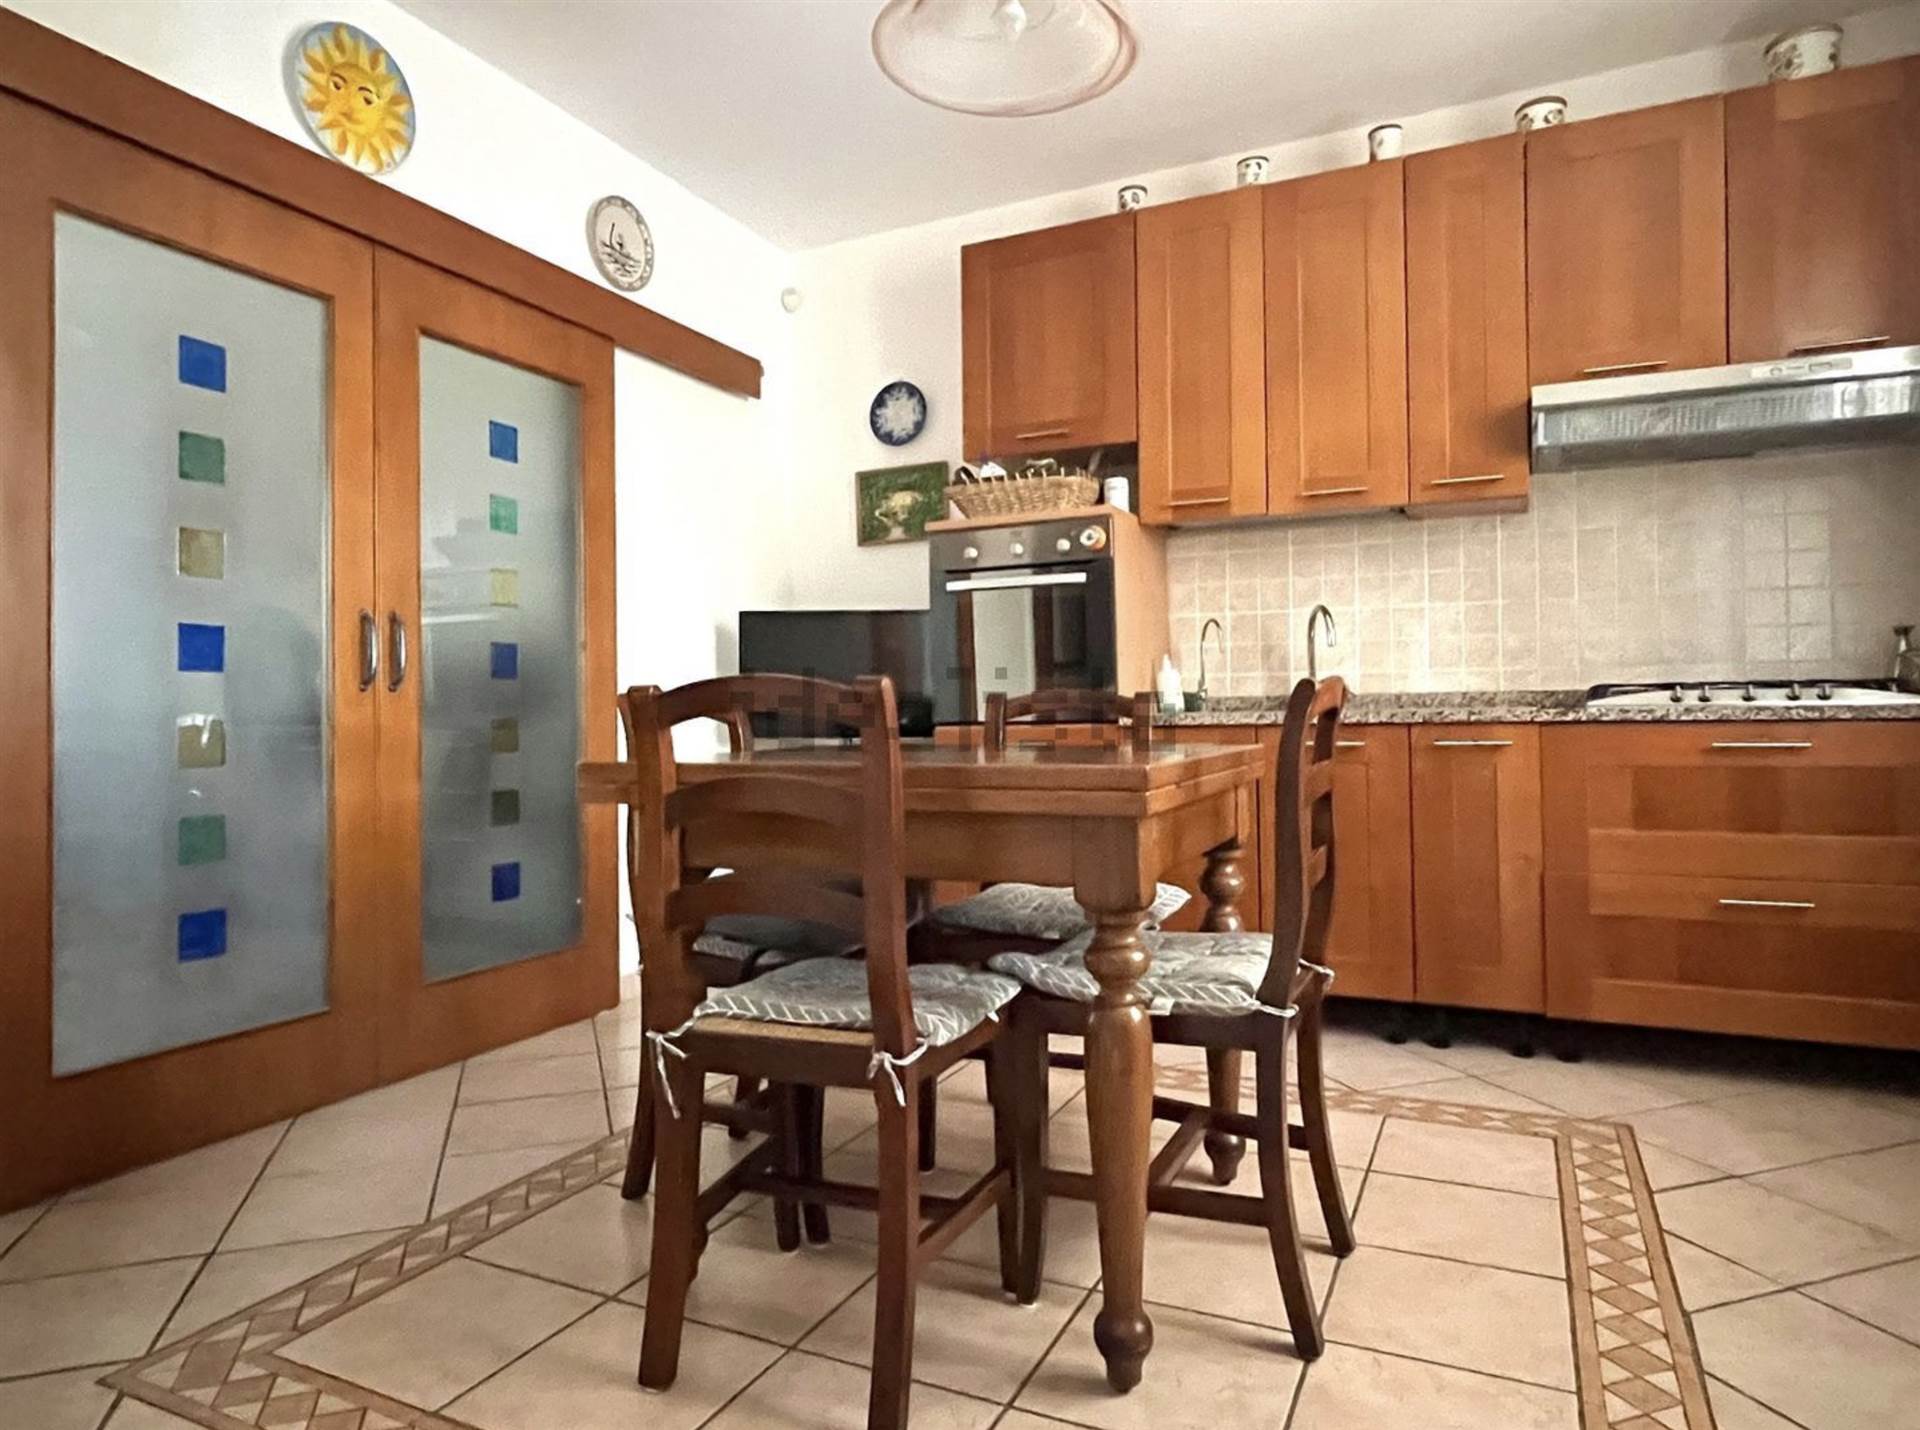 MADONNA DELL'ACQUA, SAN GIULIANO TERME, Terraced villa for sale of 137 Sq. mt., Heating Individual heating system, Energetic class: G, Epi: 152,8 